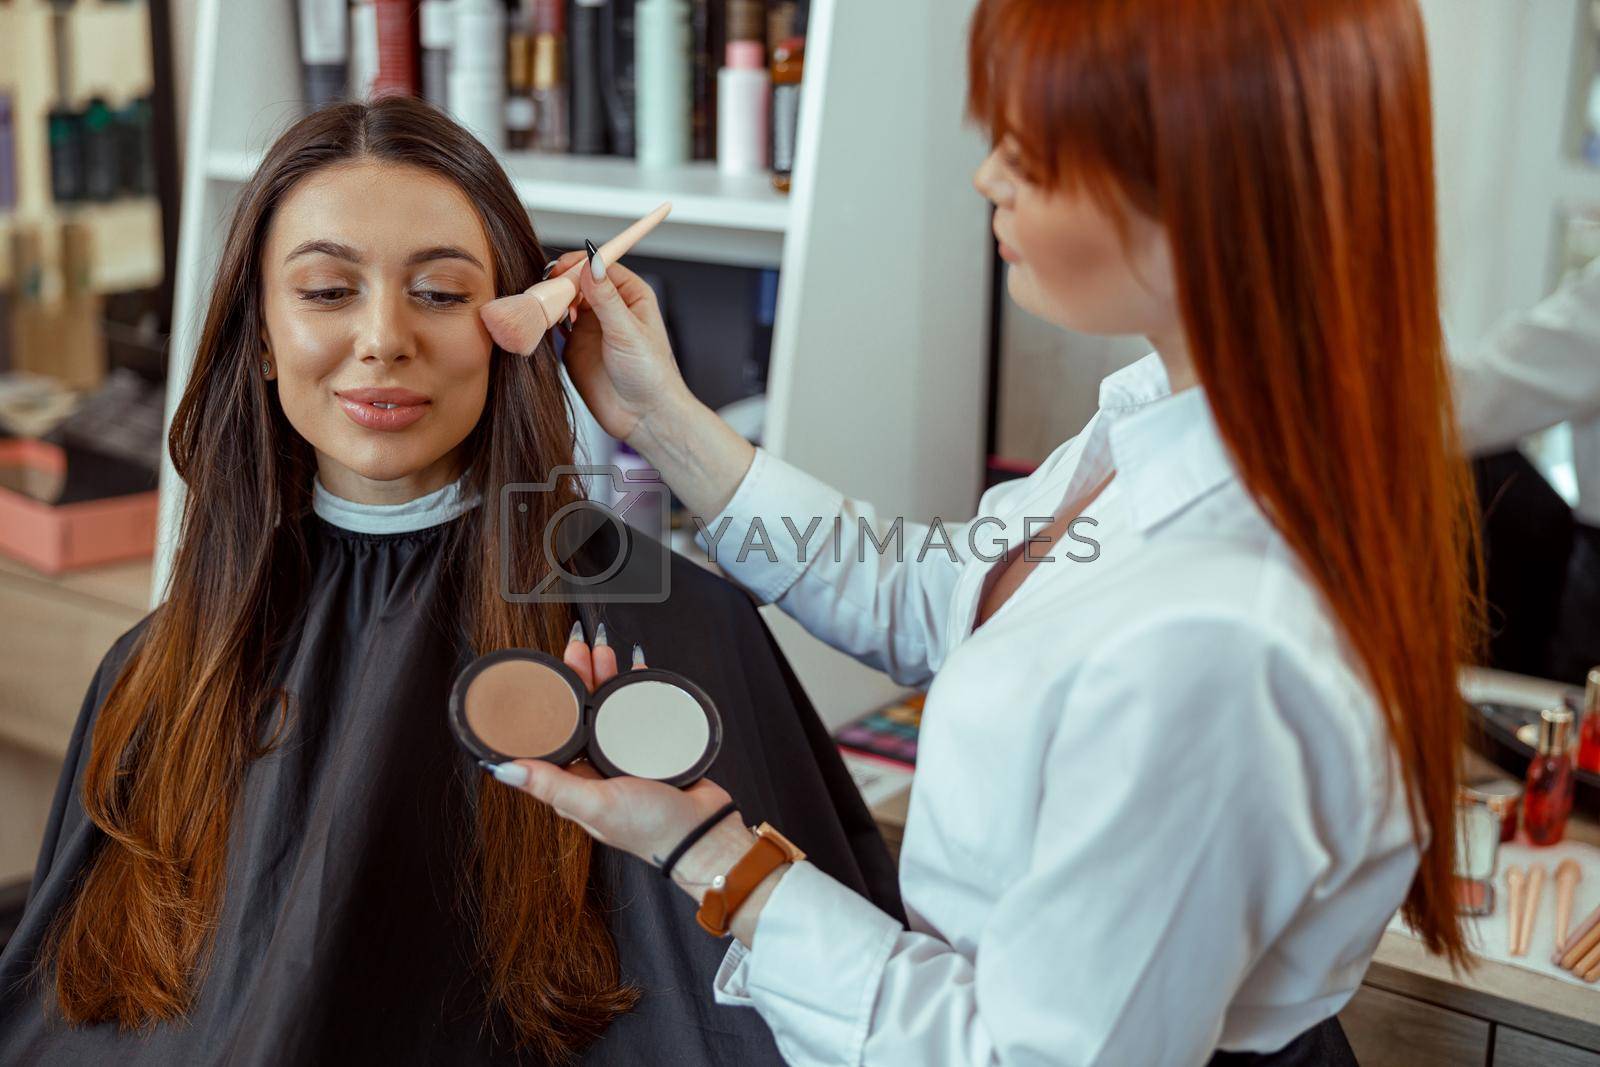 Professional makeup artist applying bronzer powder with a brush. Beauty salon services